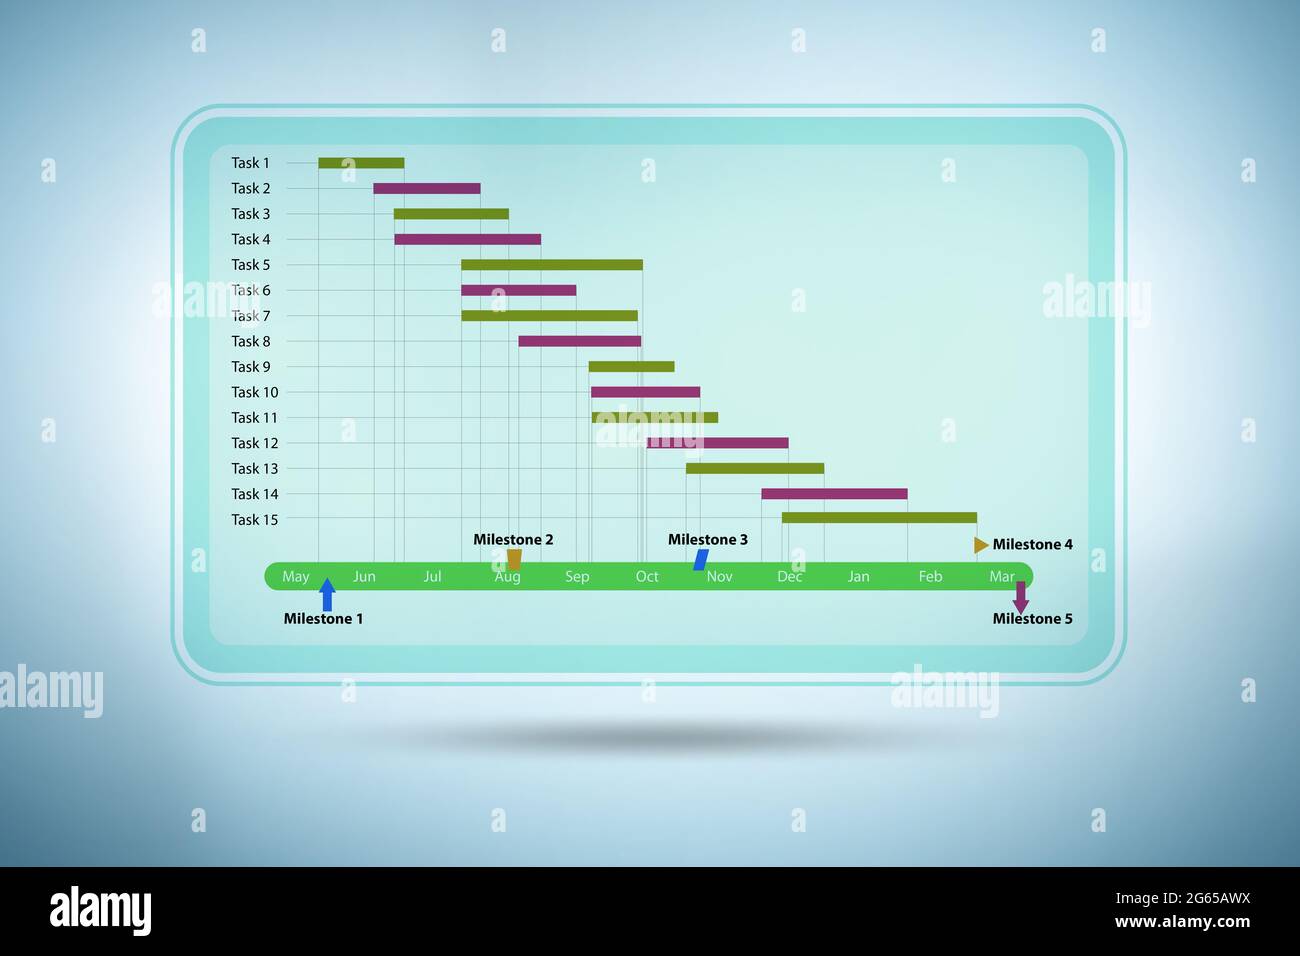 Illustration of gantt chart in the project management concept Stock Photo